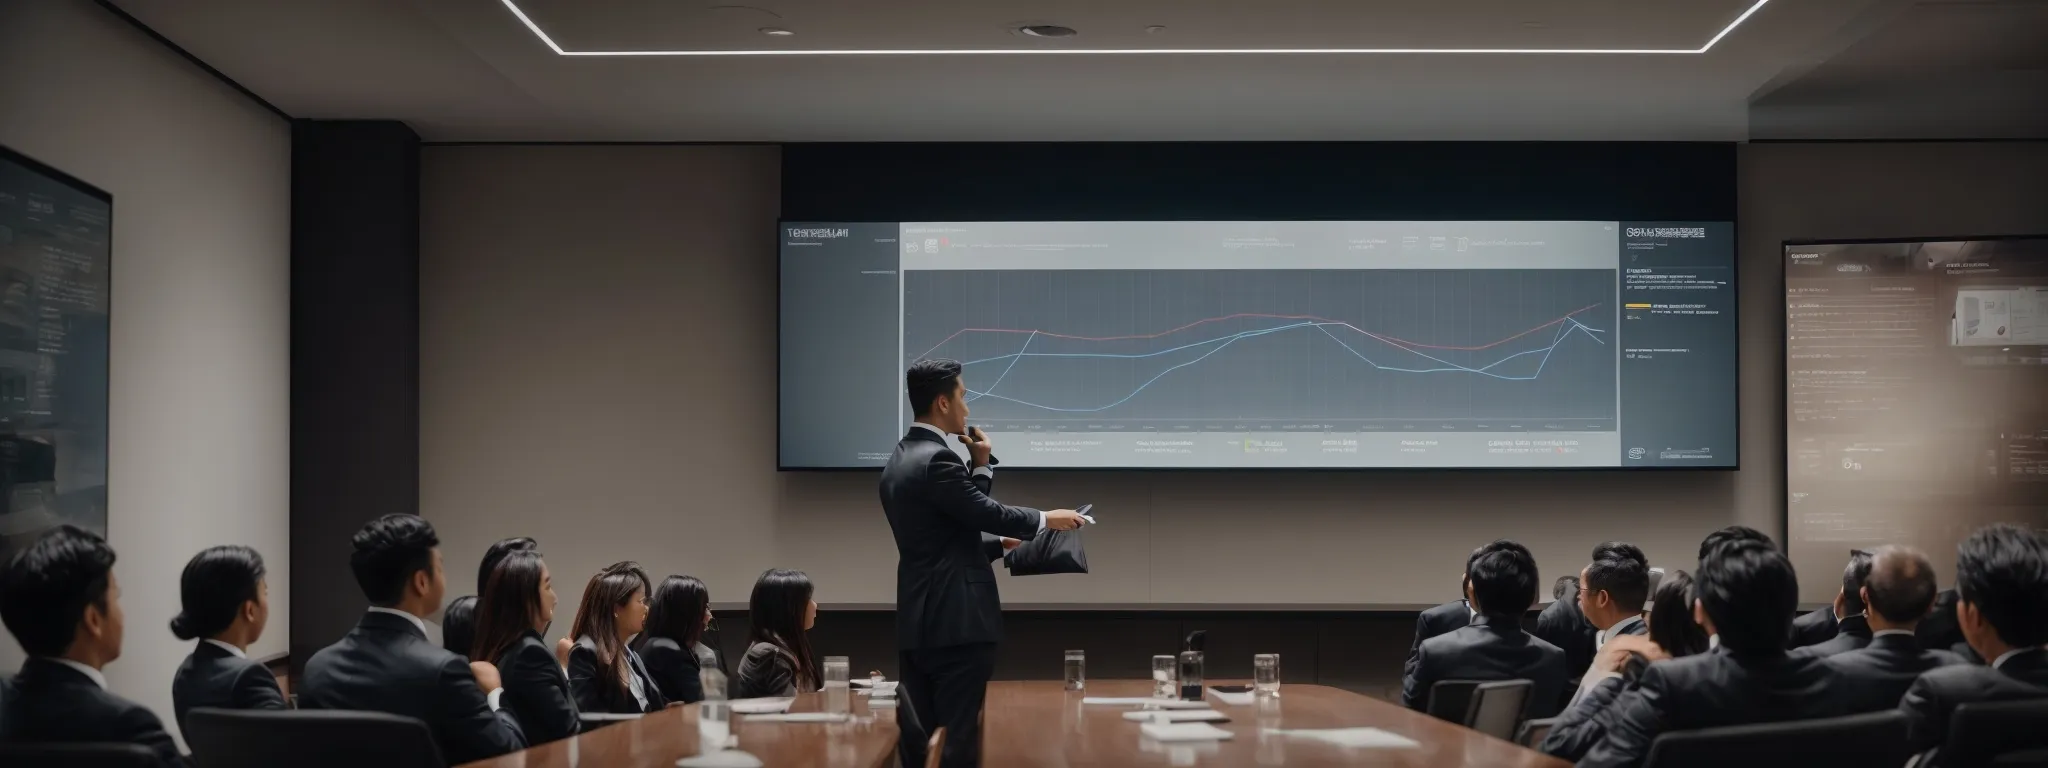 a business professional presents a graph on a large screen to an audience in a modern conference room.